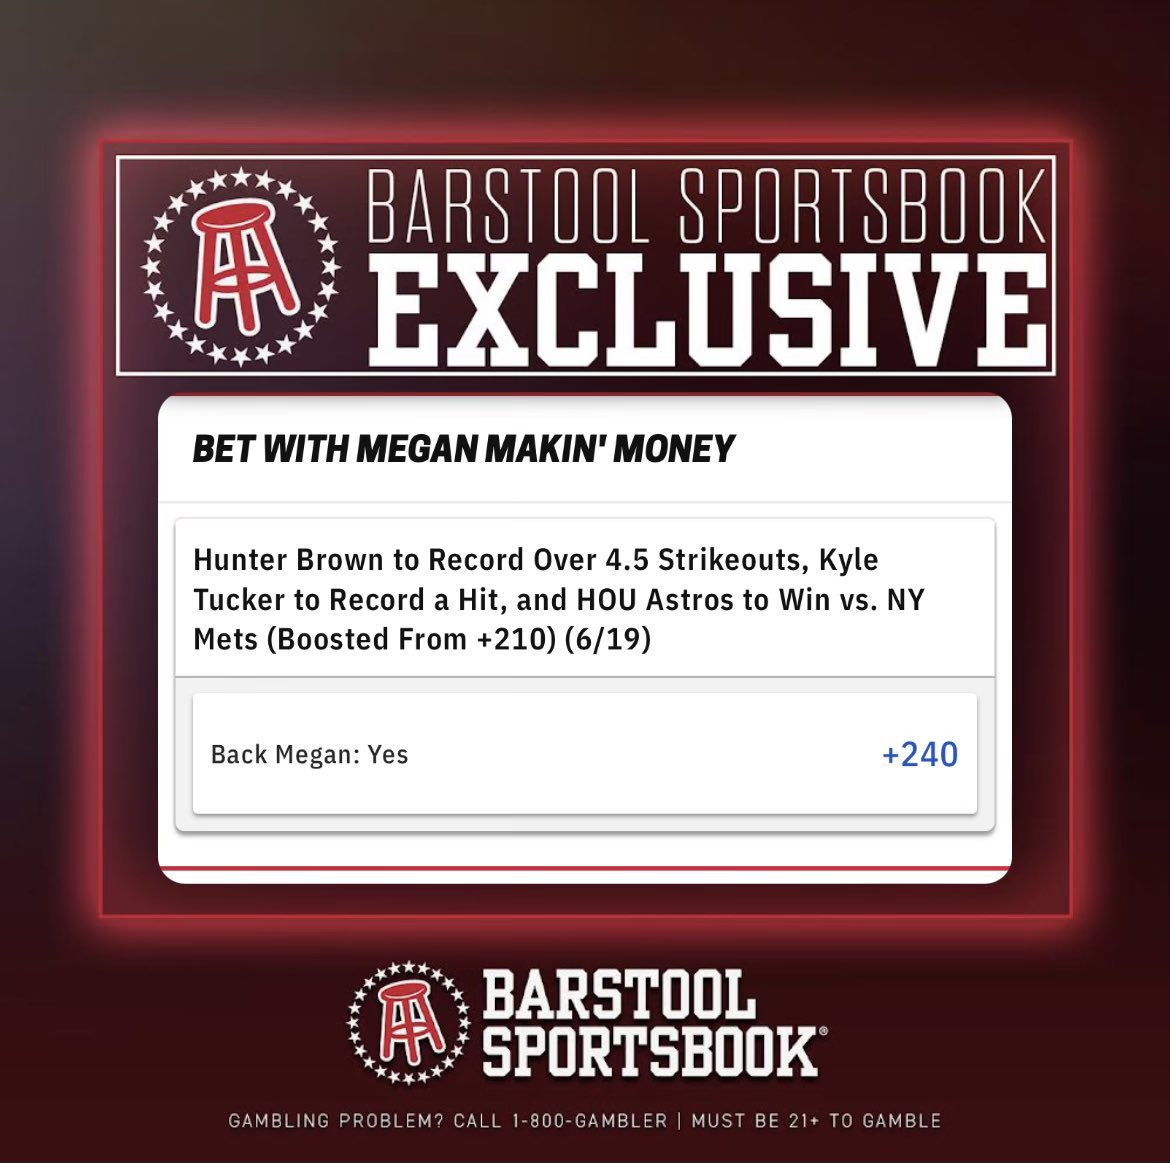 The Astros couldn’t be colder. Which means today they SMASH the Mets 

Astros ML
Kyle Tucker to get a hit
Hunter Brown Ov 4.5 K’s 

Boosted from +210 ➡️➡️➡️ +240

#BarstoolSportsbook #FrankWasRight